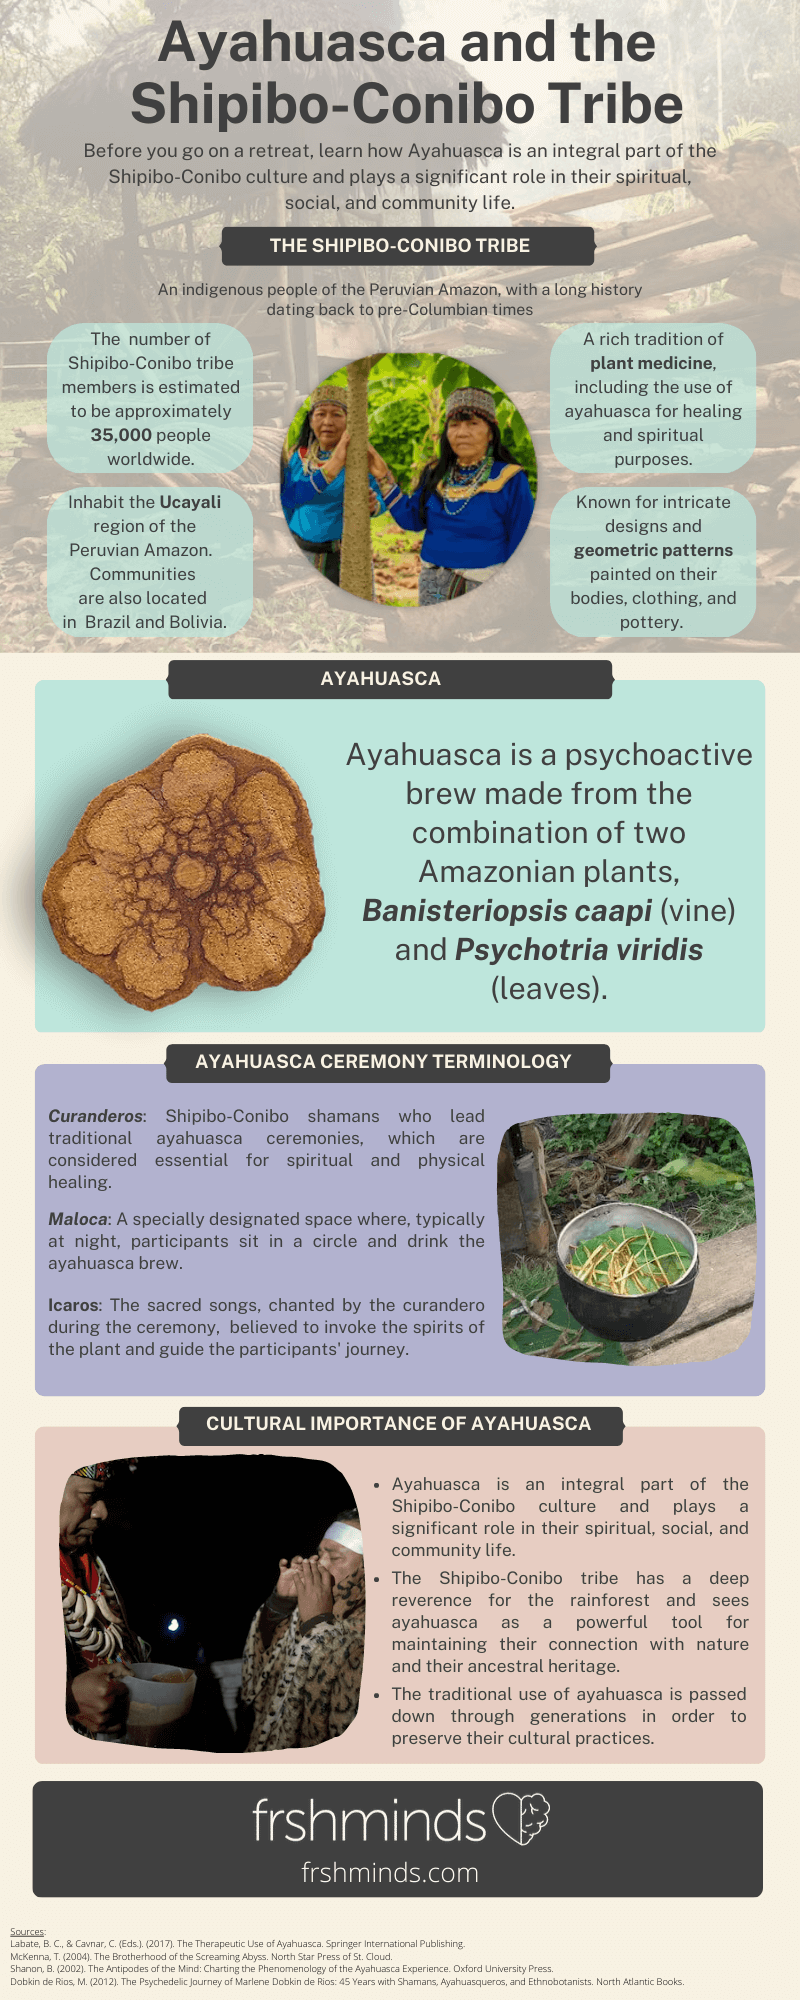 Learn more about the roots of Ayahuasca on Frshminds.com